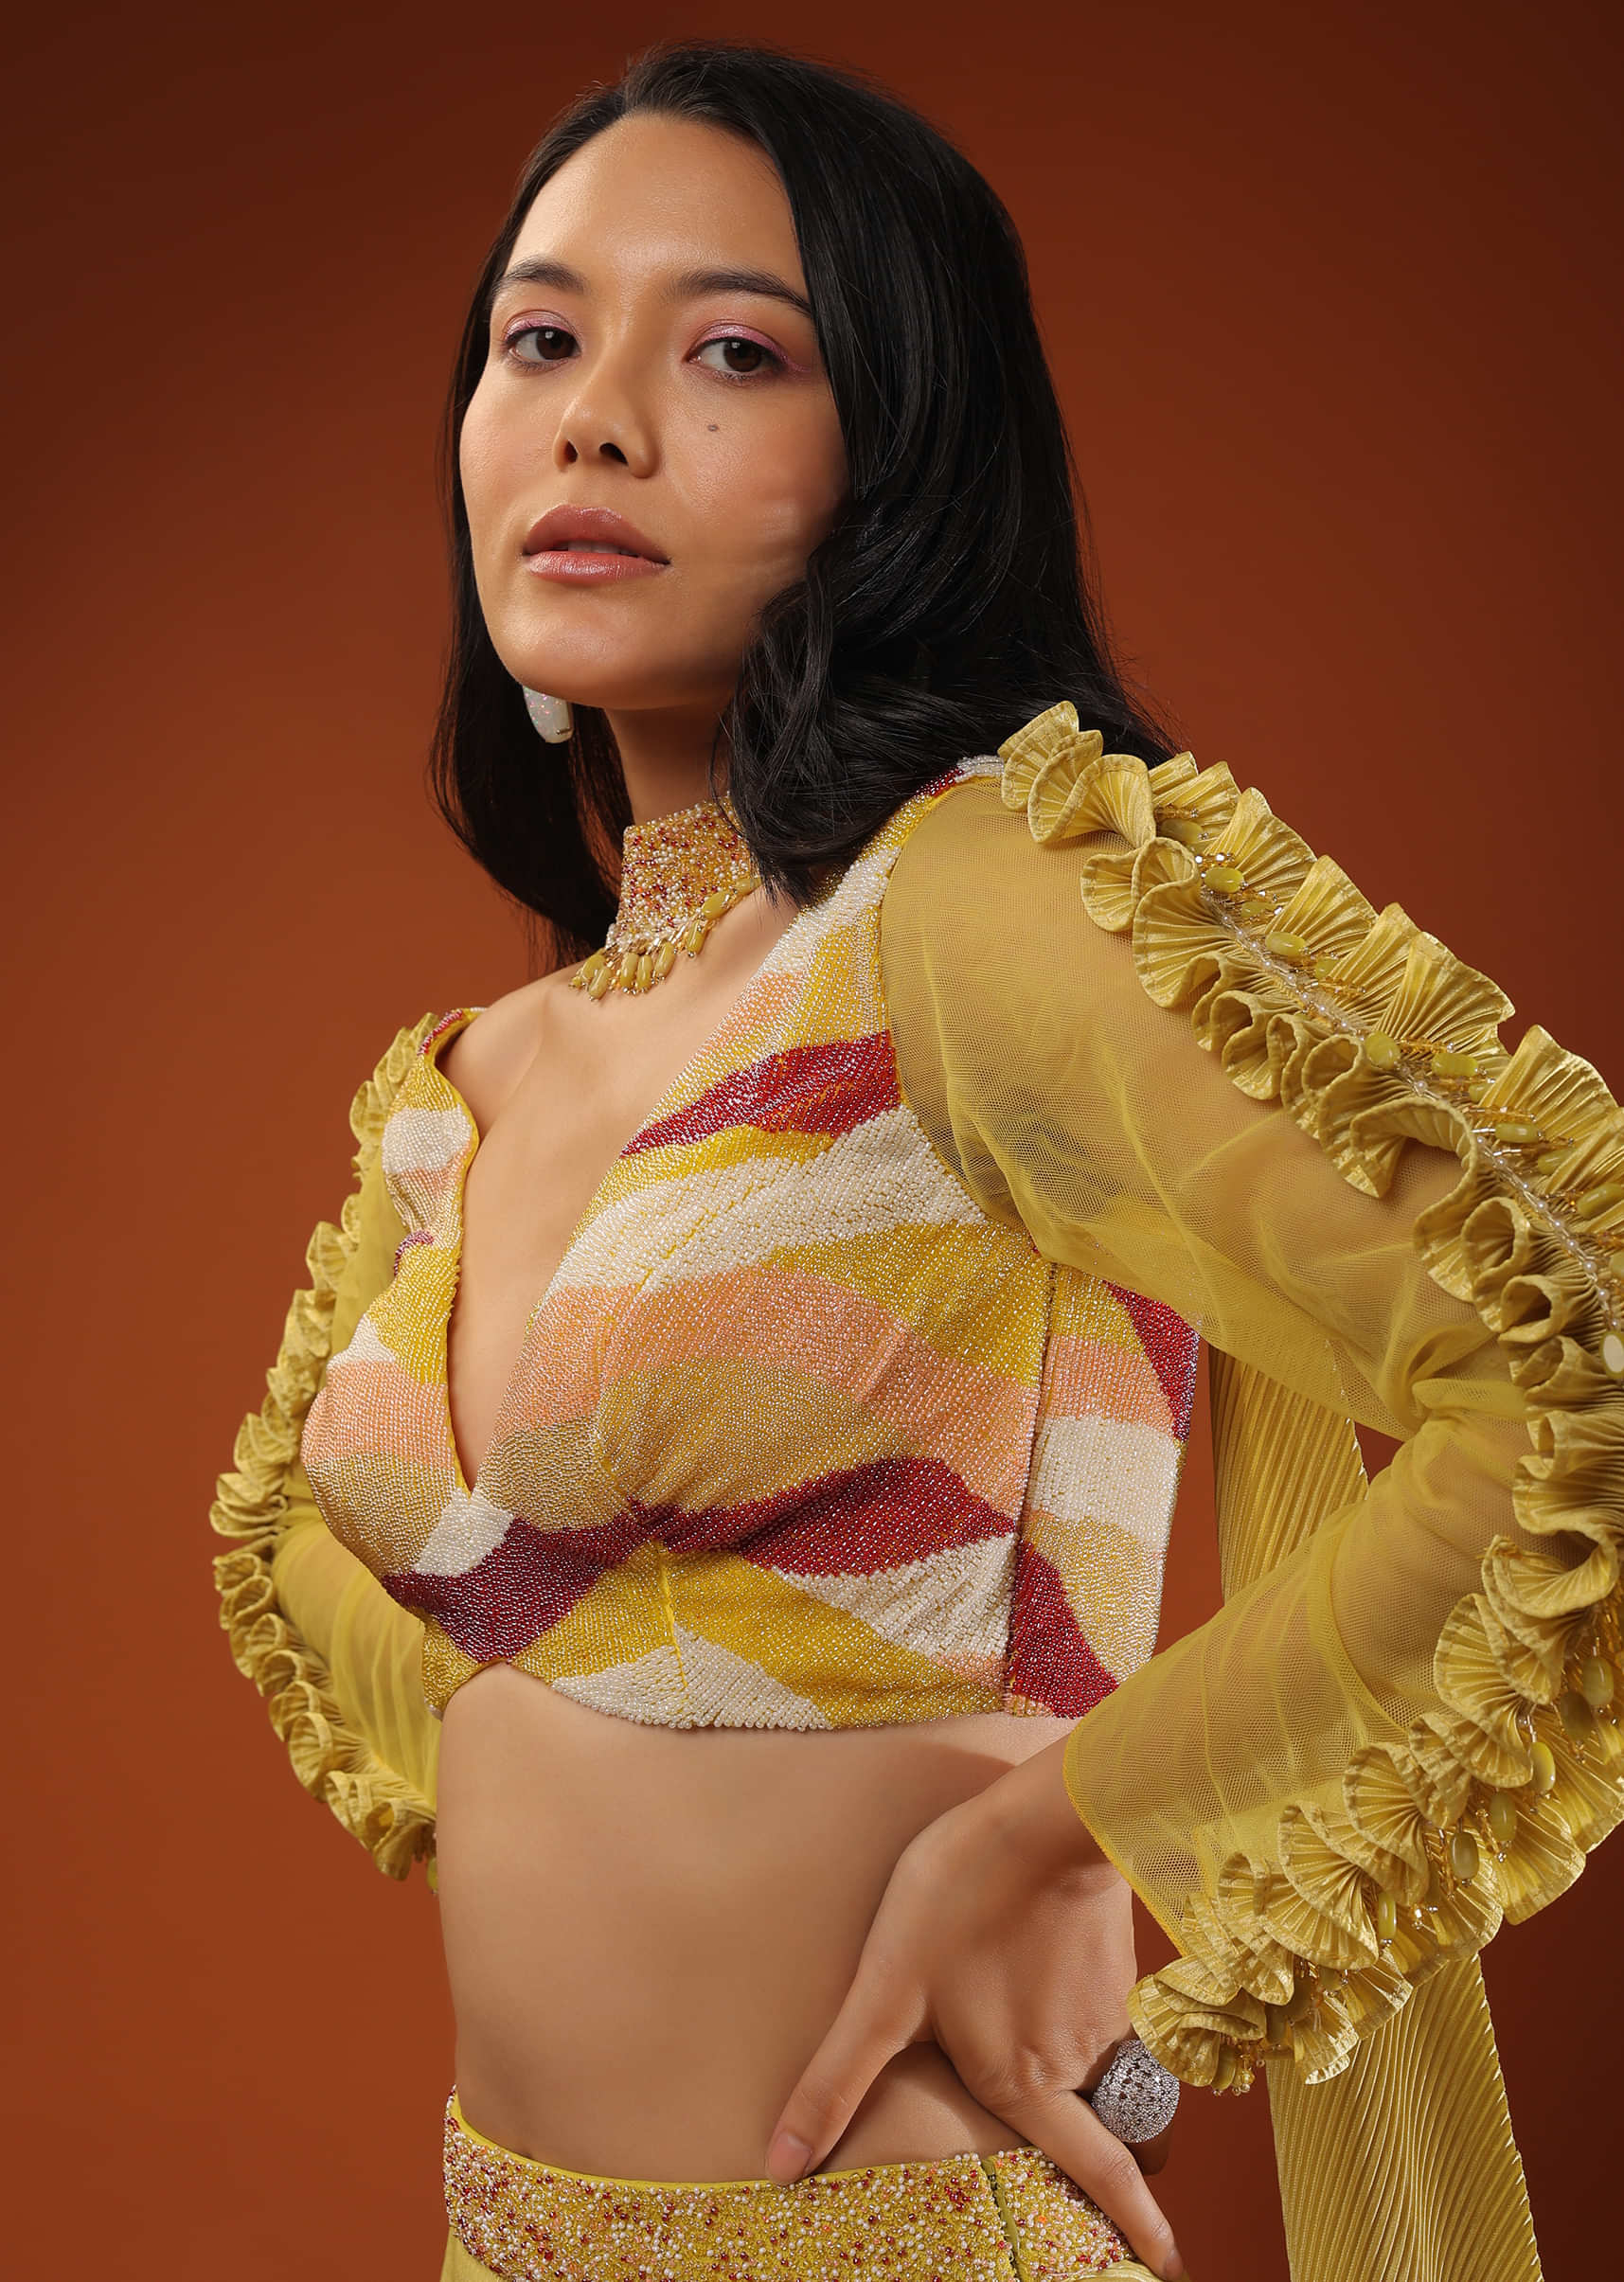 Mustard Yellow Lehenga And A Crop Top With Frills On The Top Of The Sleeves, Crafted In Crepe With Moti Embroidery